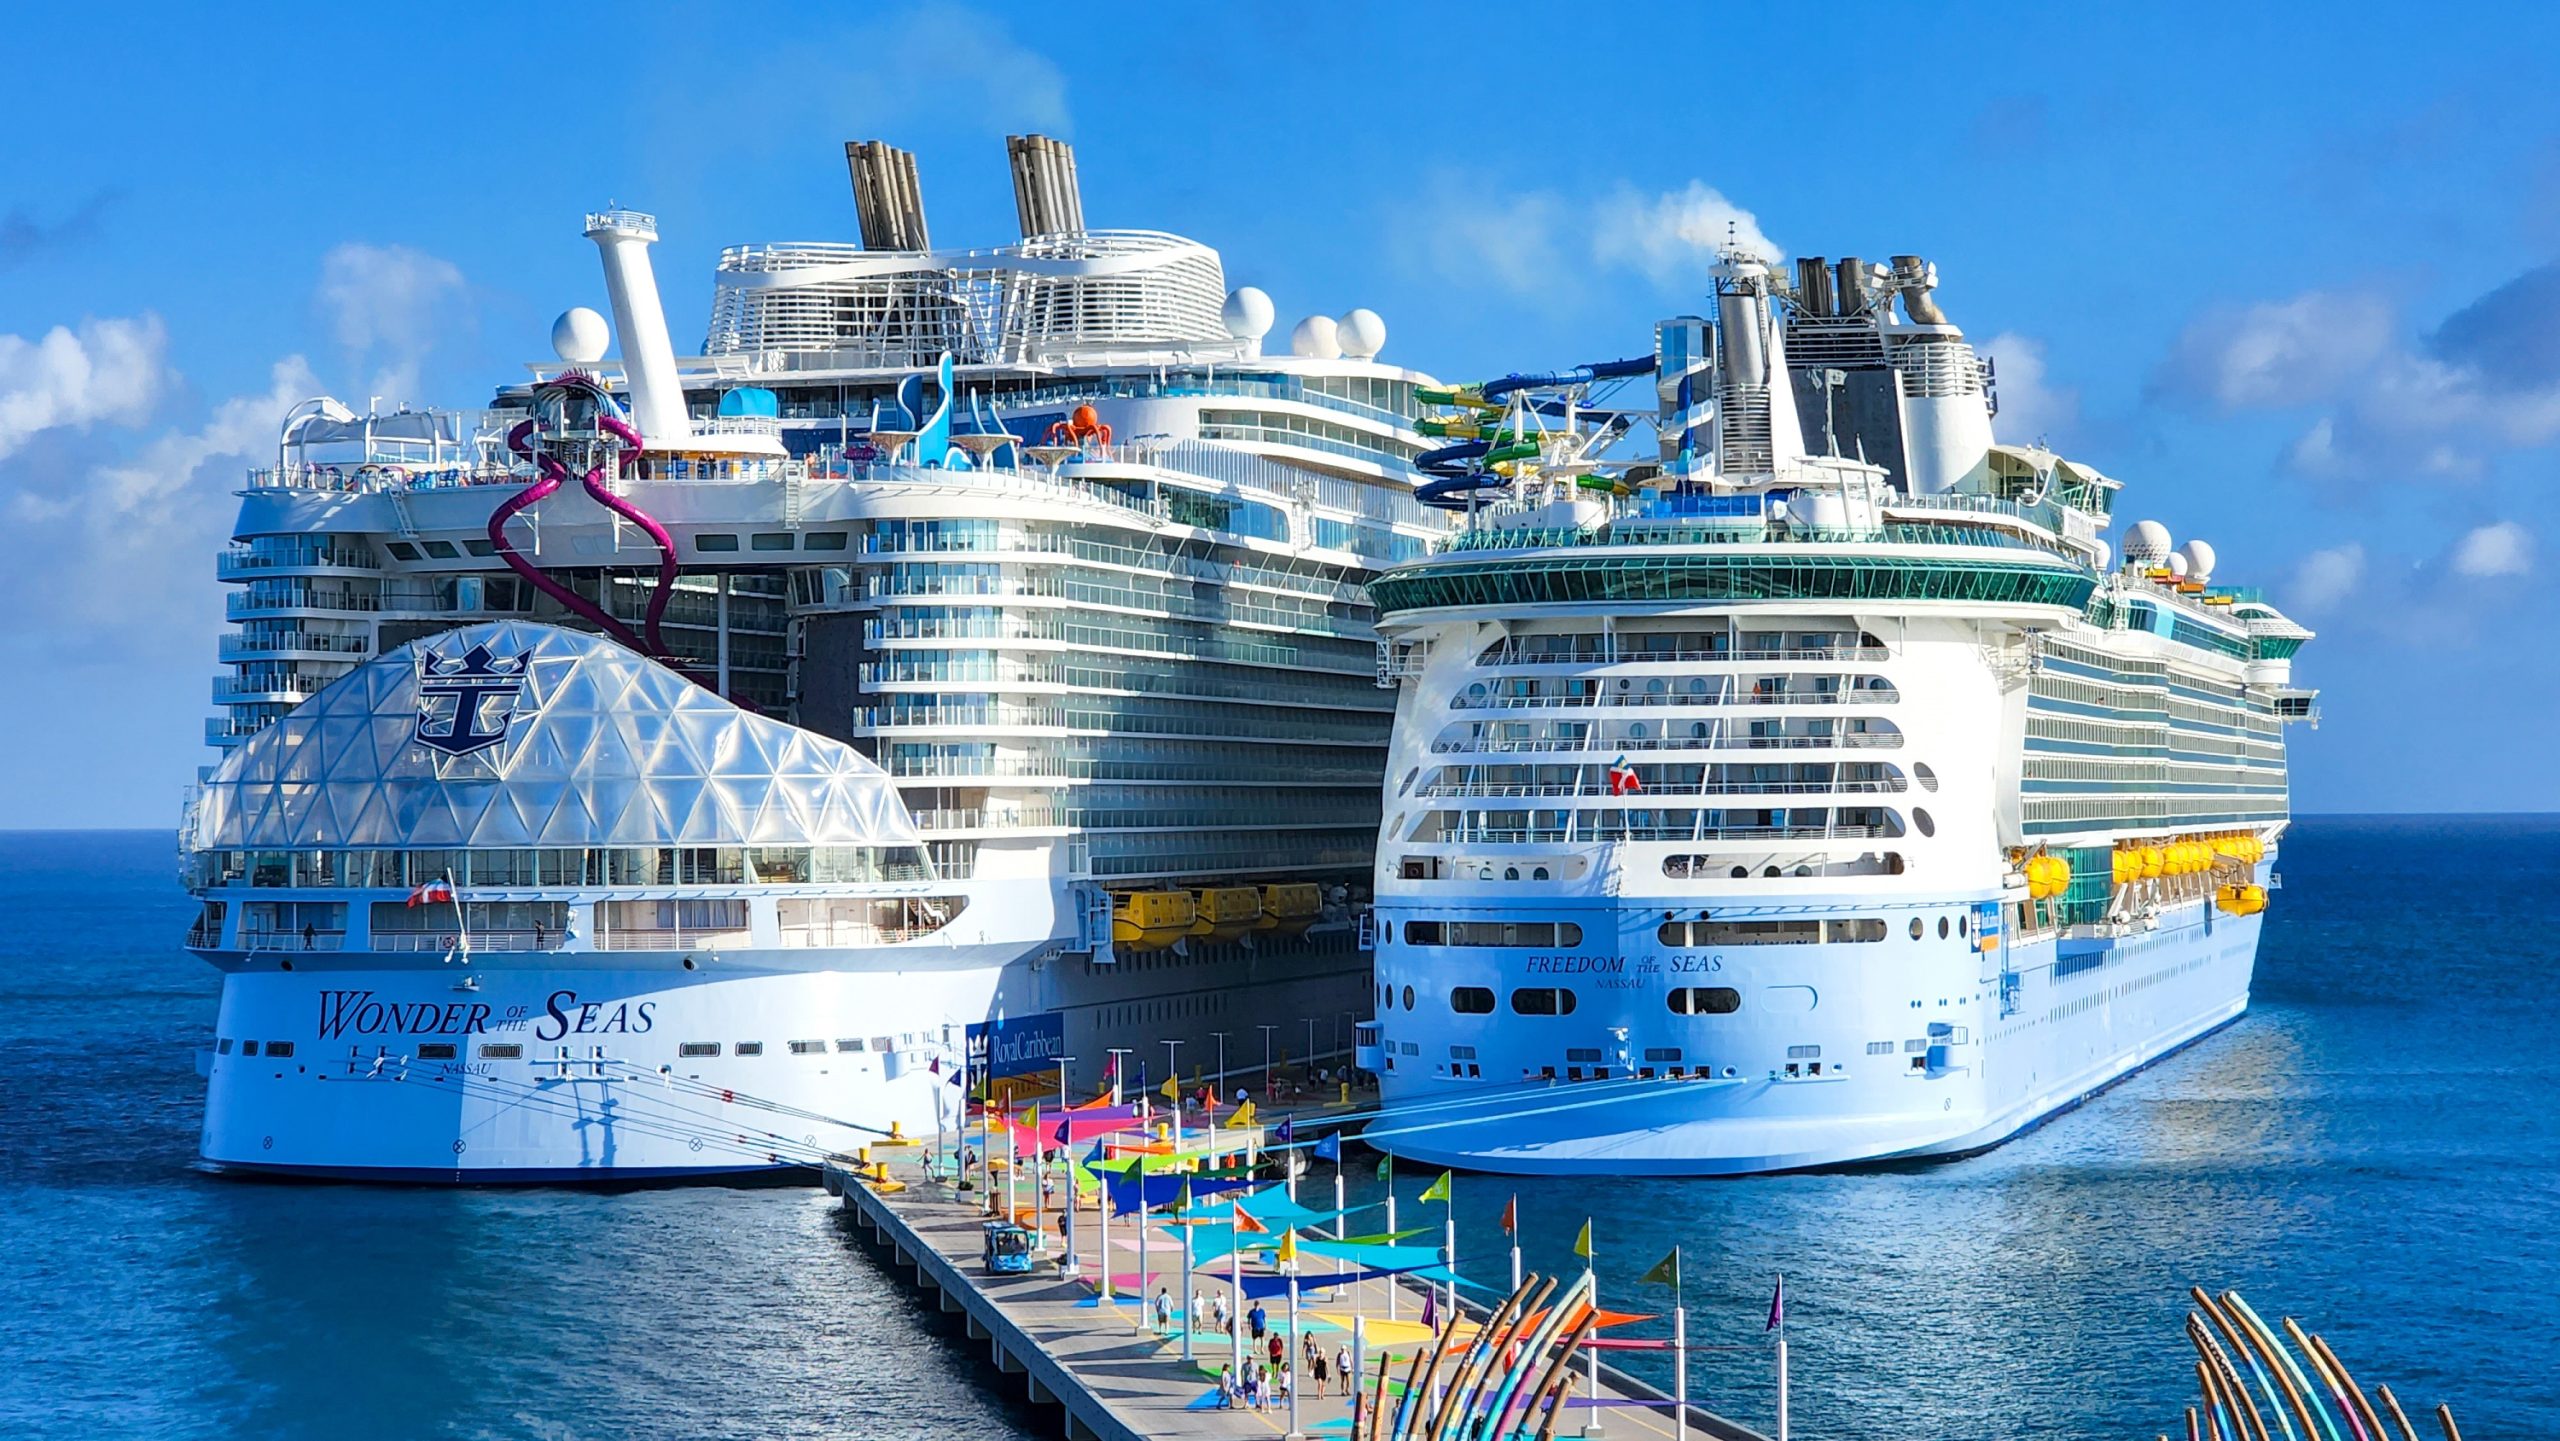 A Voyage Across Royal Caribbean’s Fleet, Newest to Oldest